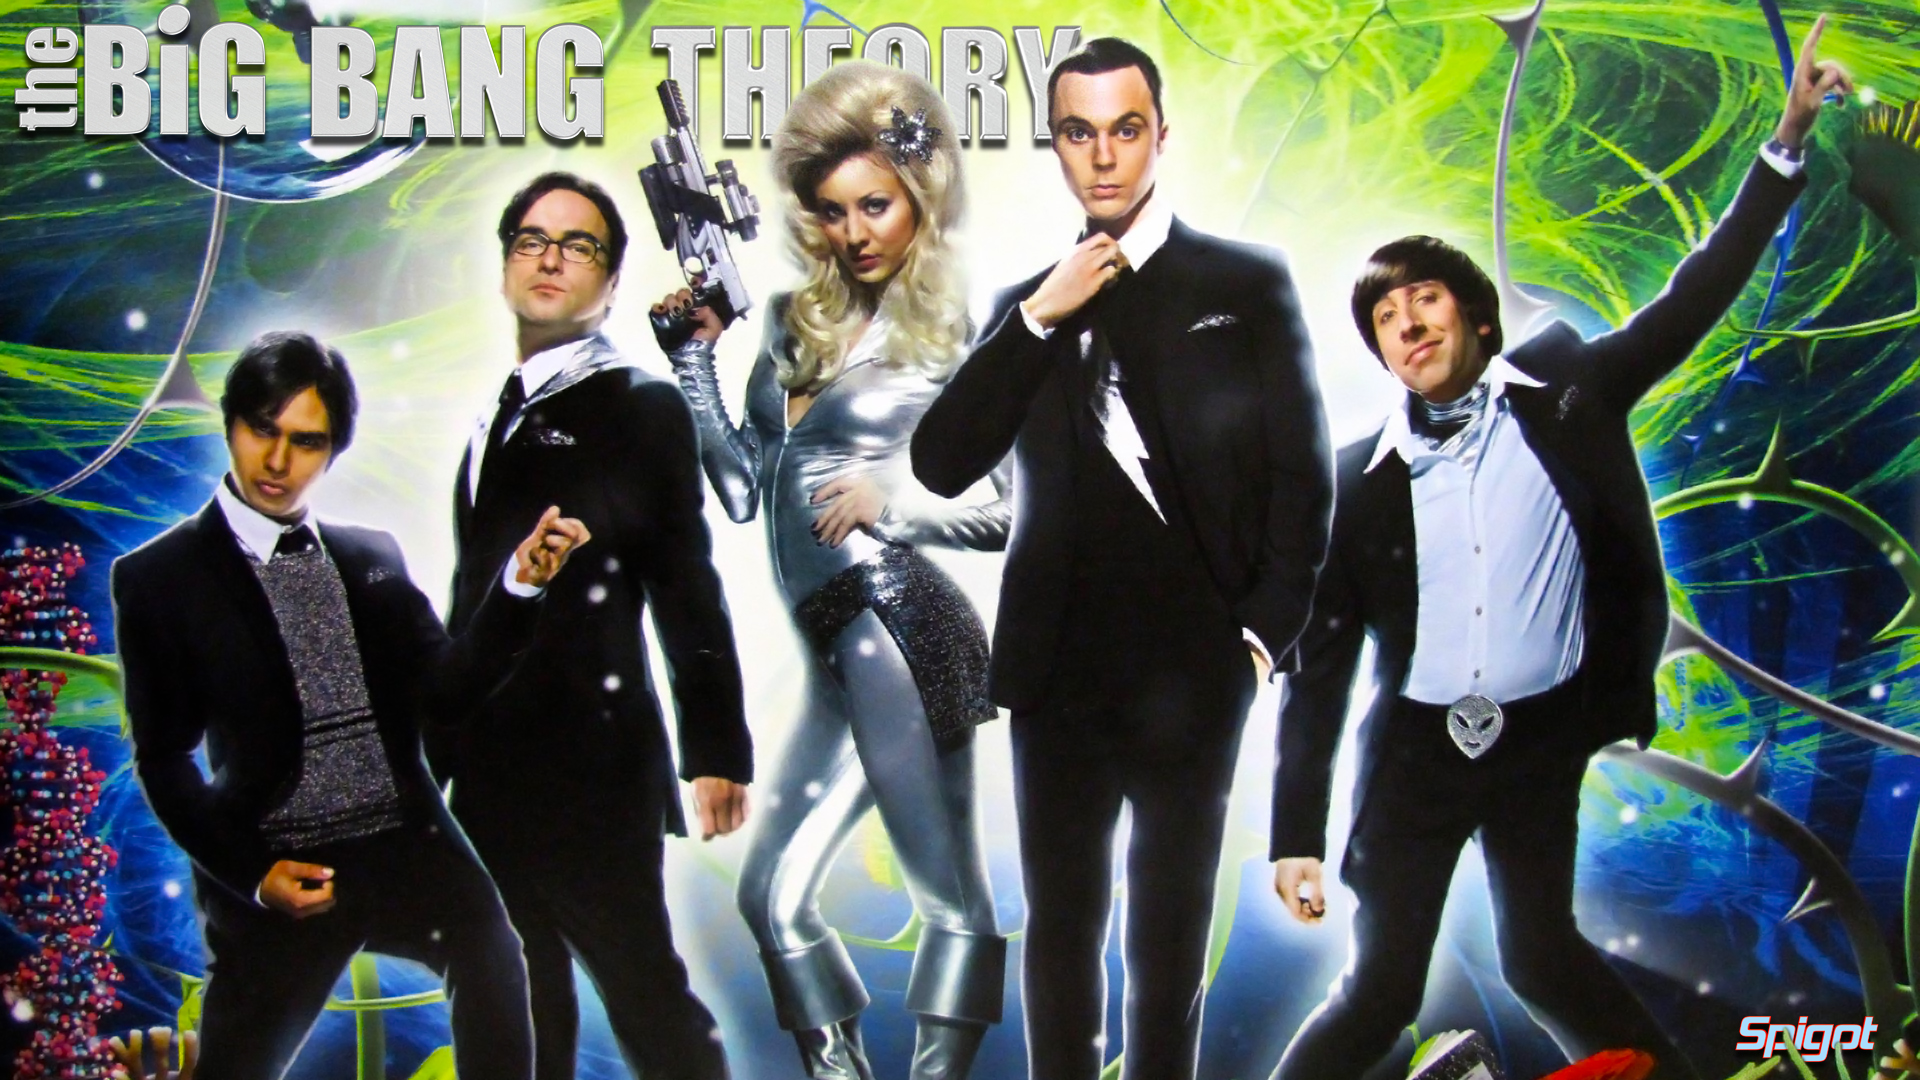 Two More Wallpaper Of This Awesome Show The Big Bang Theory